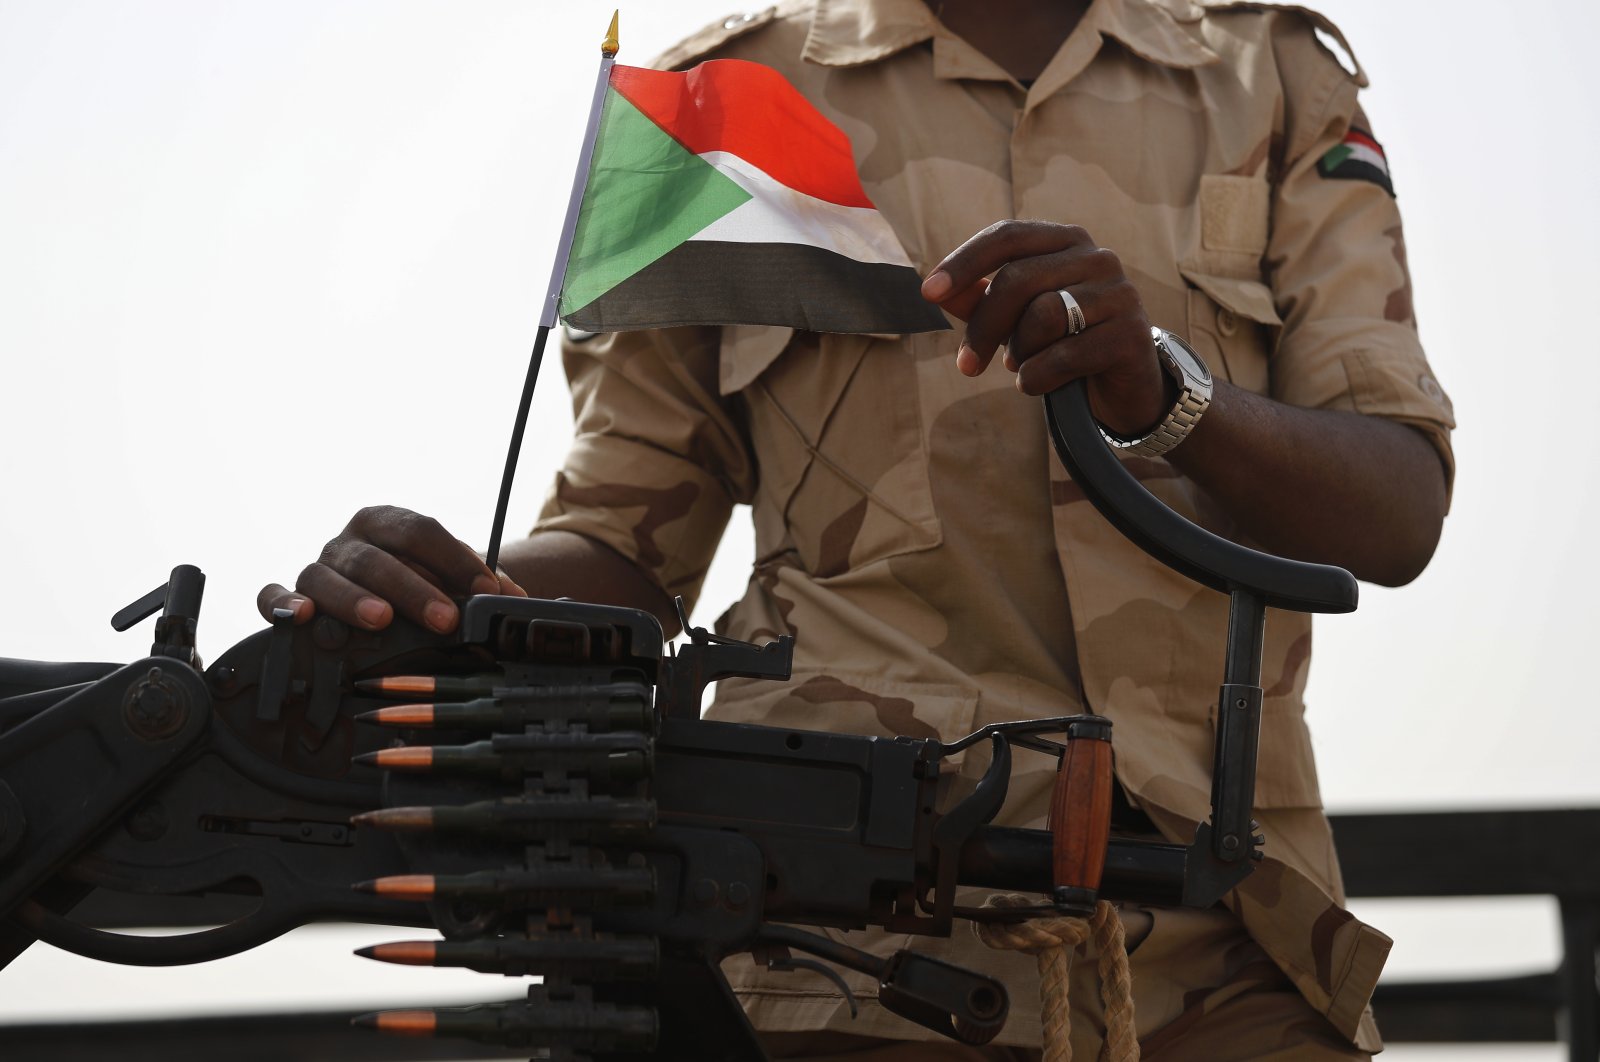 A Sudanese soldier from the Rapid Support Forces or RSF, led by Gen. Mohammed Hamdan Dagalo, stands on his vehicle during a military-backed rally, in the eastern province of the River Nile, Sudan, June 22, 2019. (AP Photo)